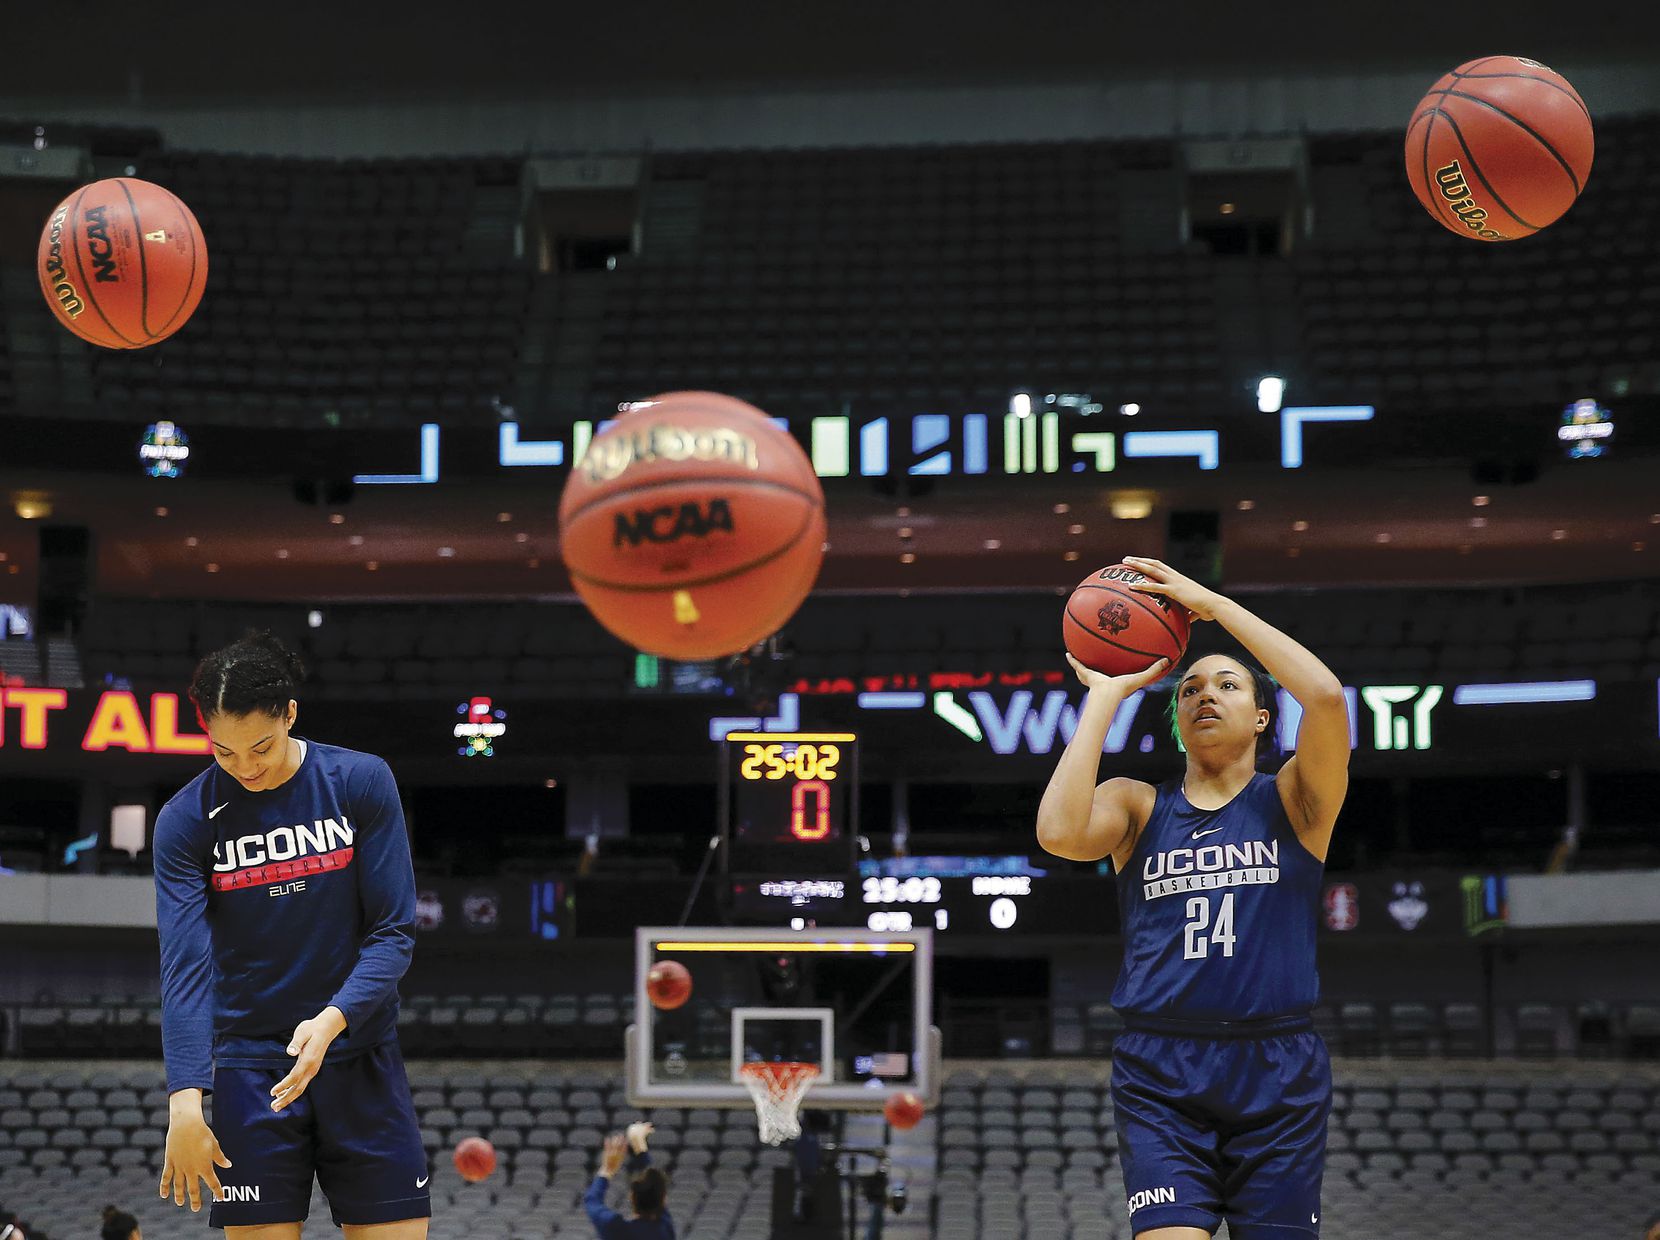 Connecticut Huskies guard/forward Napheesa Collier (right) and teammate Gabby Williams shoot baskets during practice for their NCAA Womenâs Final Four semifinal game at American Airlines Center in Dallas.